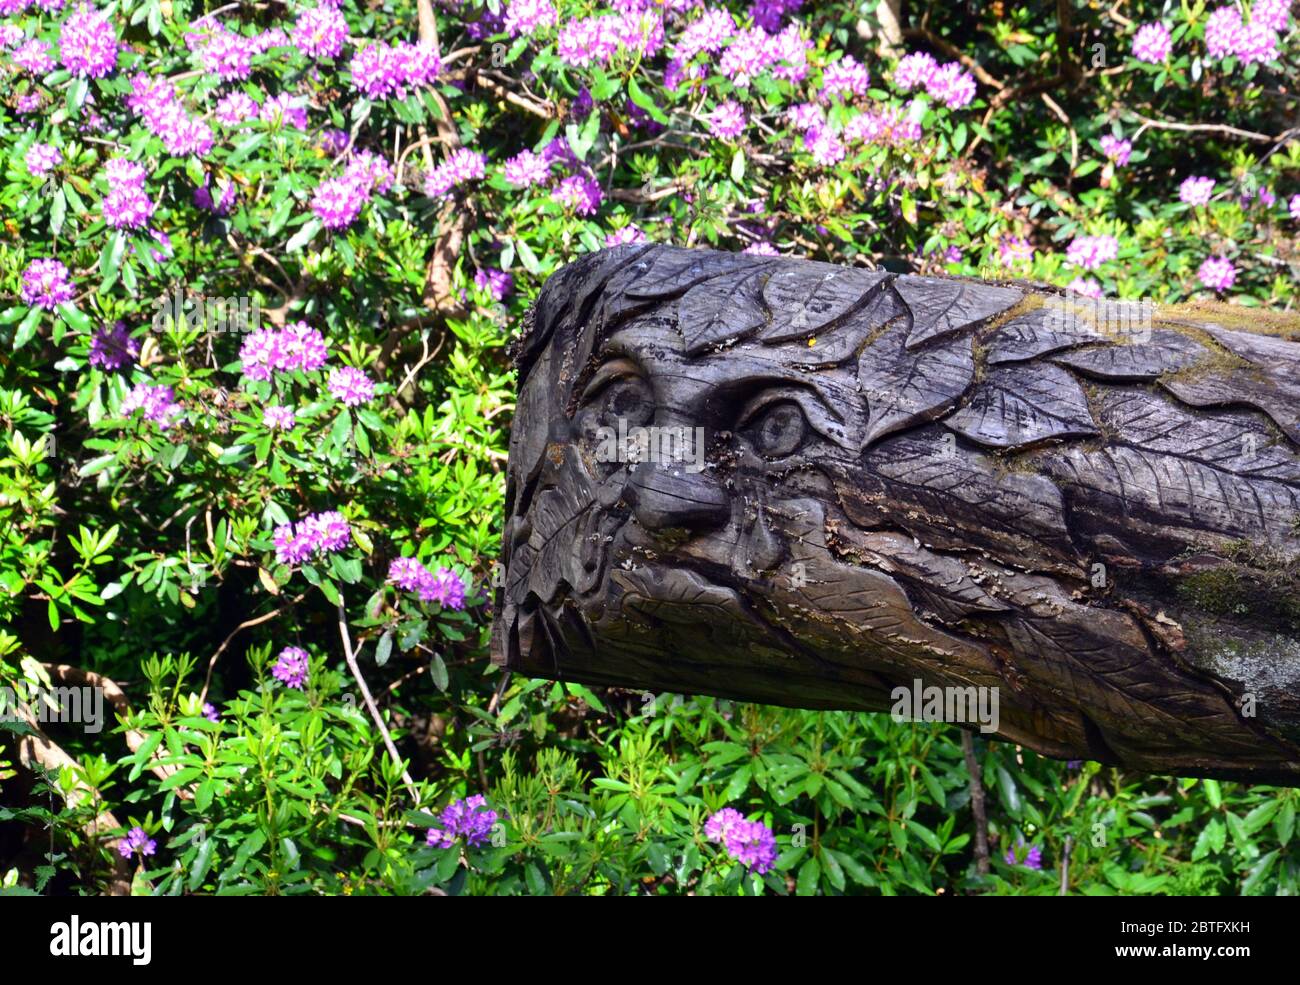 A face carved into a dead, fallen tree in Heaton Park, Manchester, England, uk. Stock Photo